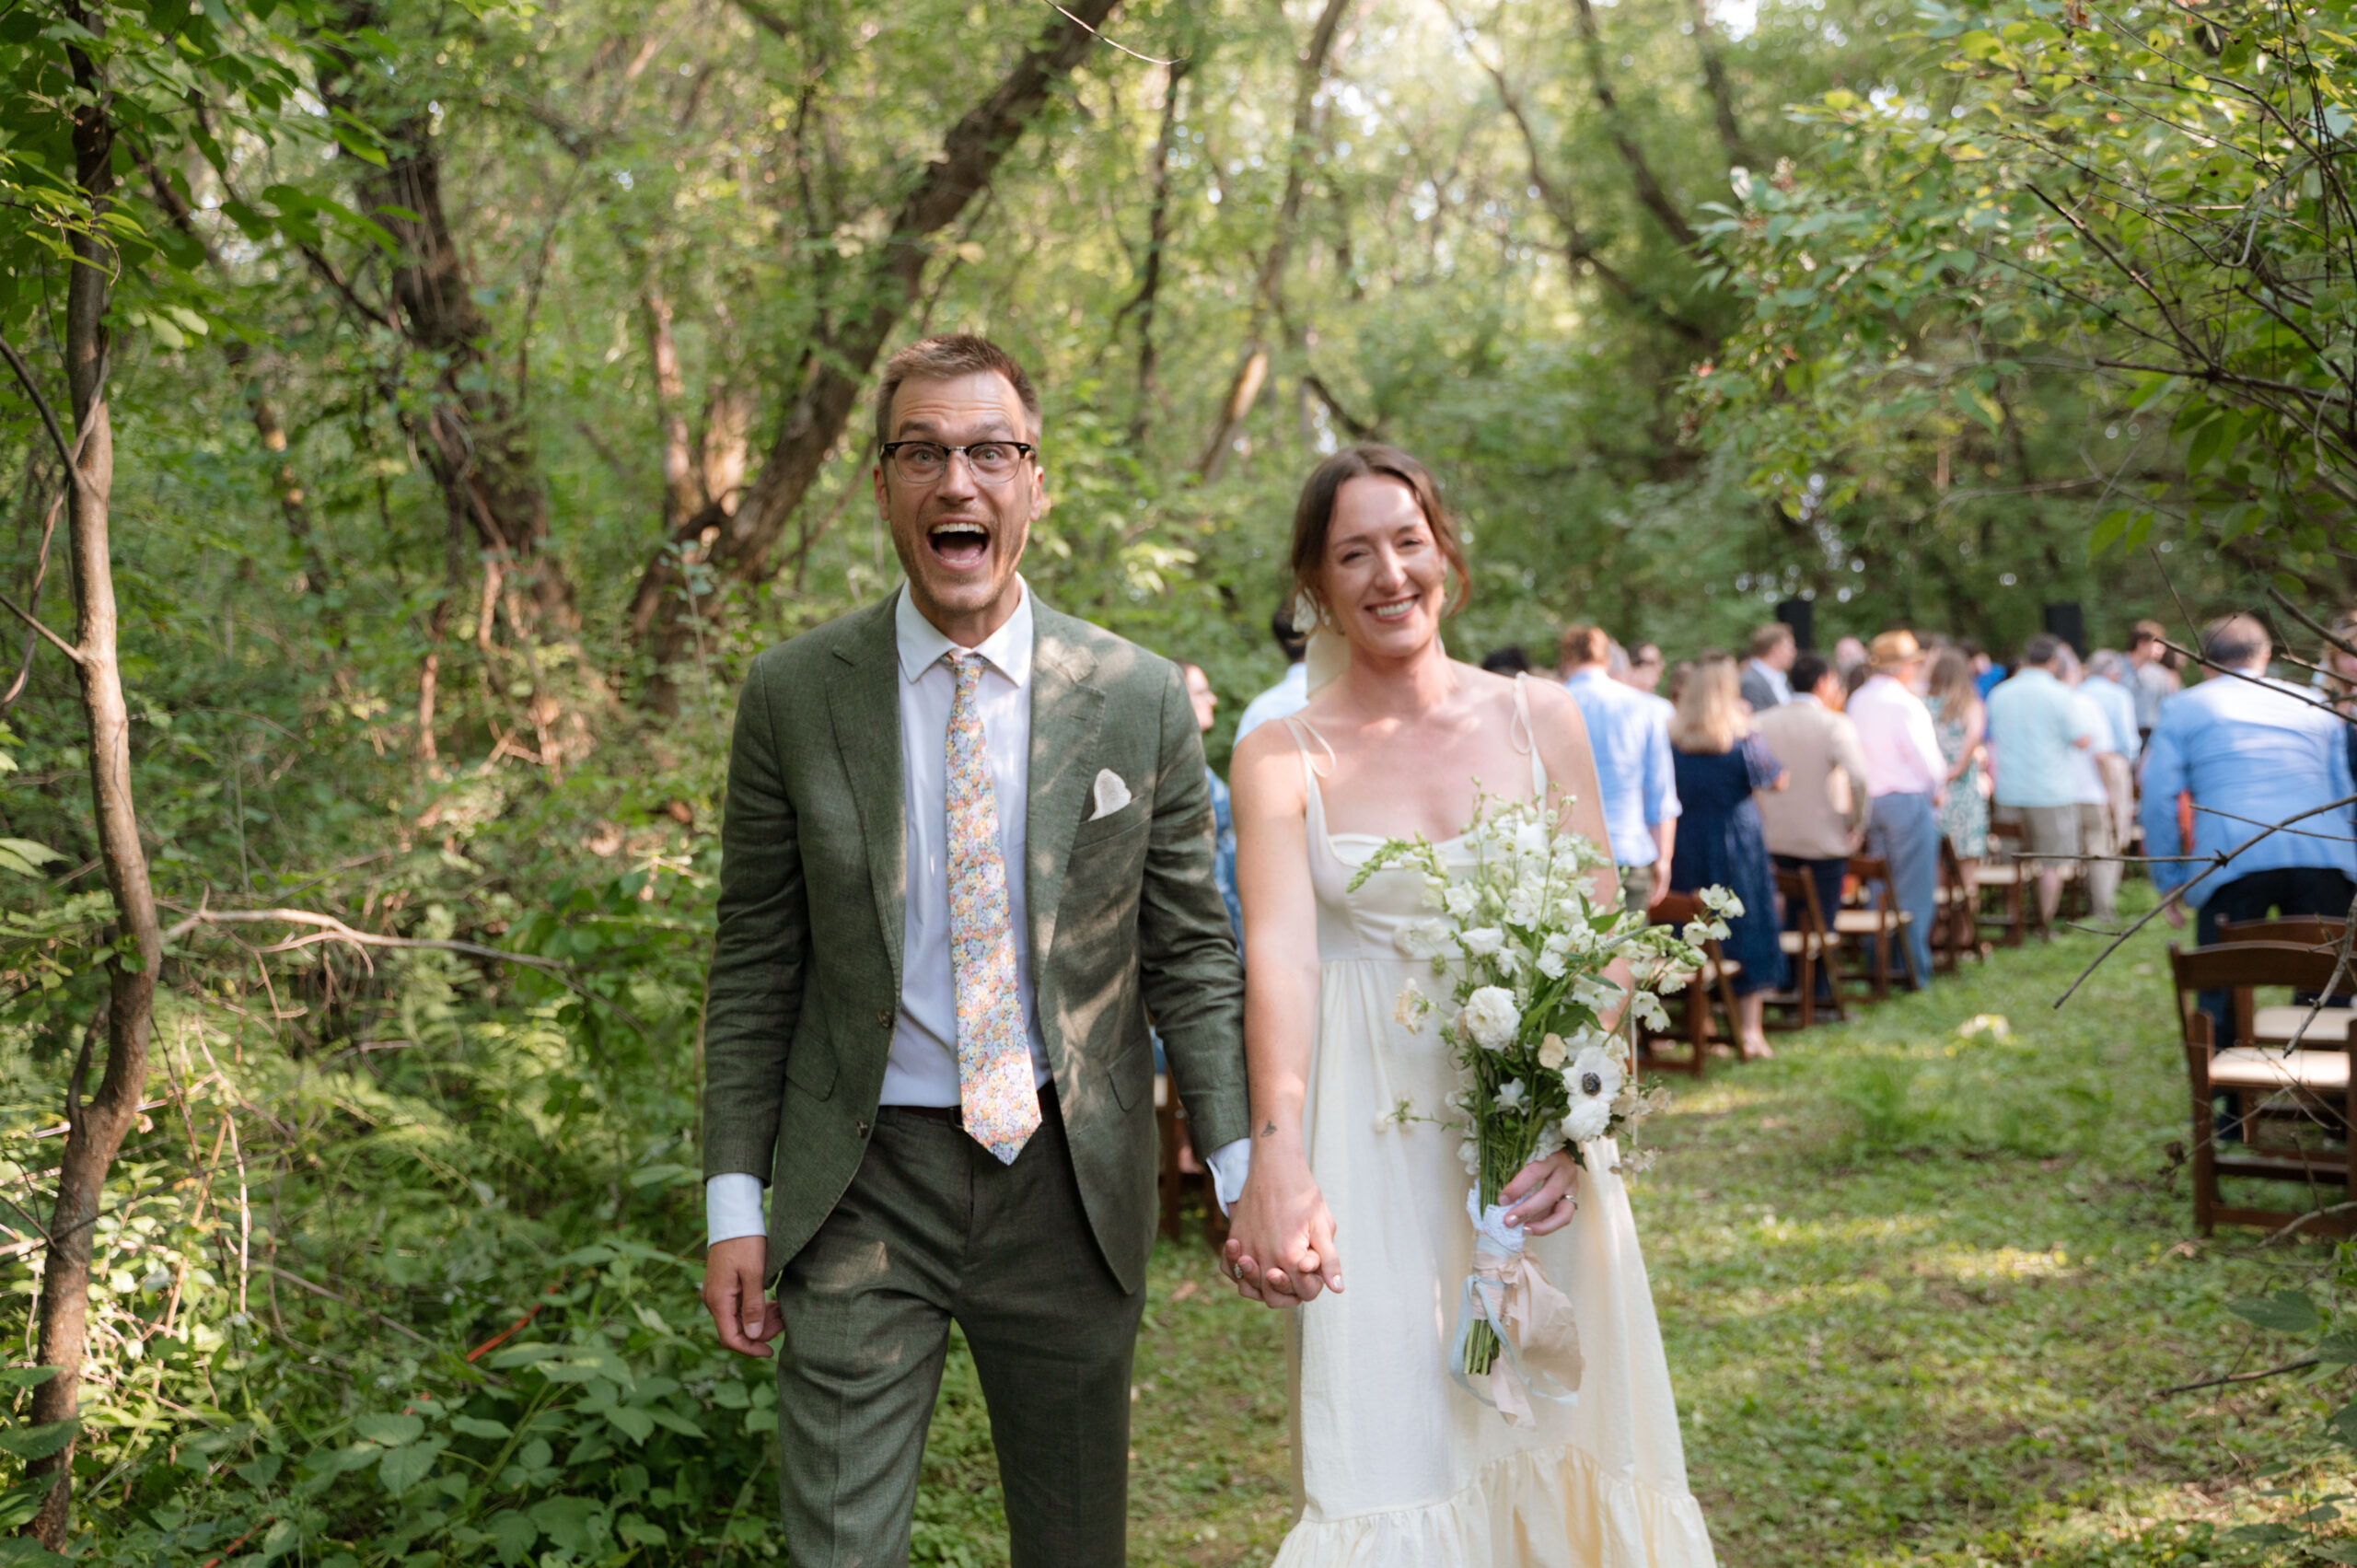 Loving, fashionable couple exited to be married at end of ceremony